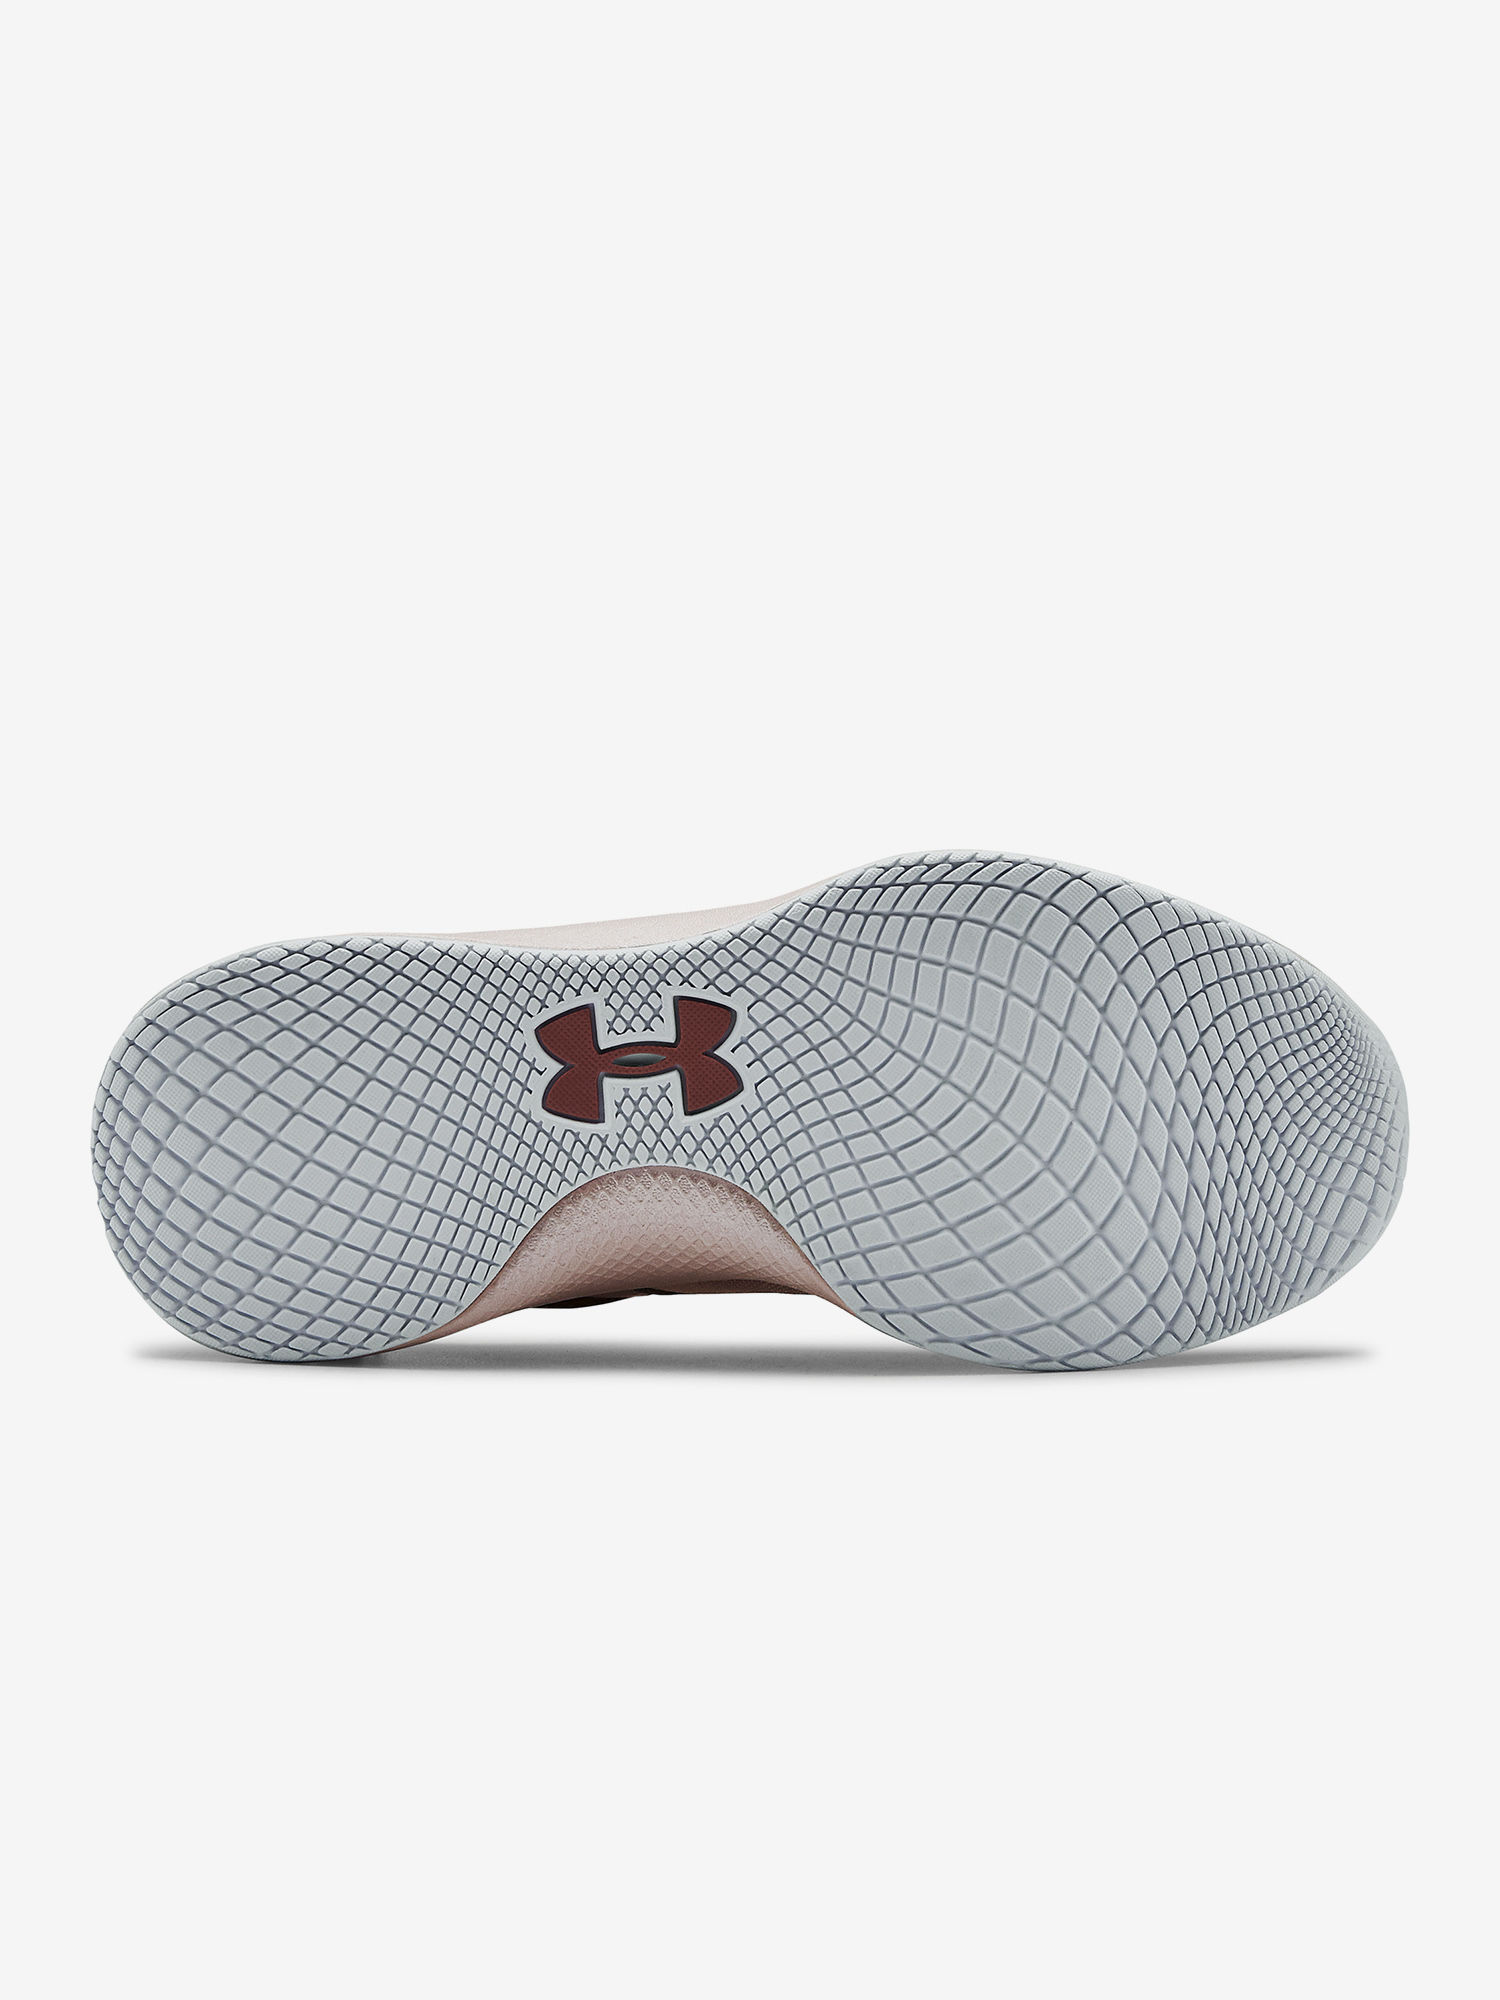 Boty Under Armour W Charged Breathe Tr 2 (4)